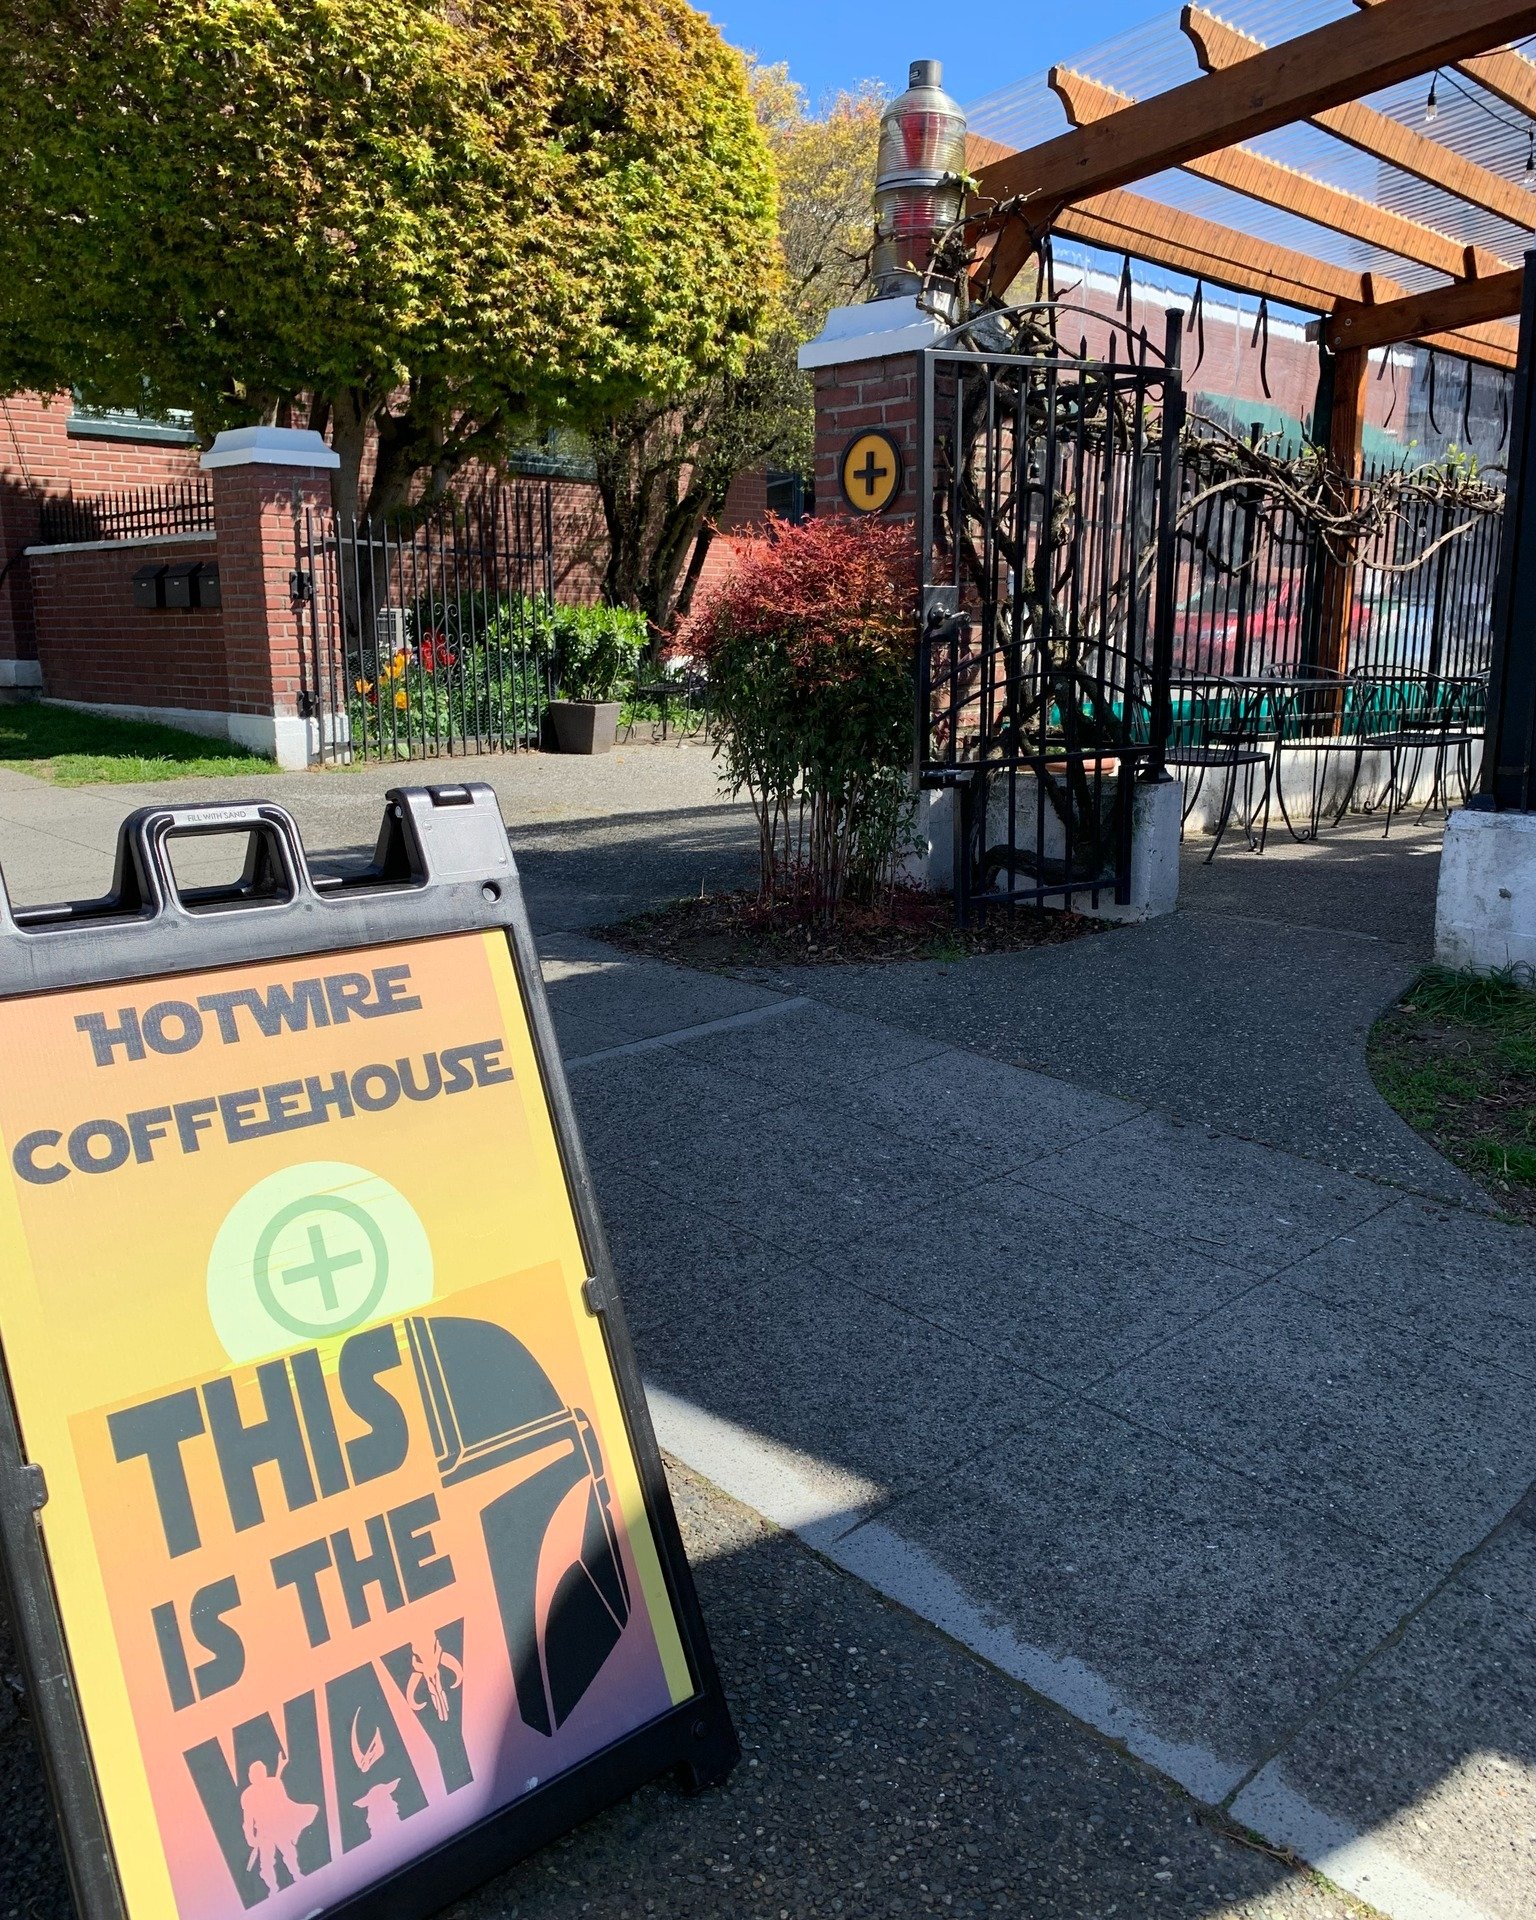 Every great week starts with caffeine and Hotwire is here to keep you caffeinated! ➕☕

#hotwire #seattlecoffee #specialsofthemonth #hotwirecoffee #westseattle #coffeeholic #caffeine #igcoffee #icedcoffee #coffeedaily #coffee #coffeetime #coffeelover 